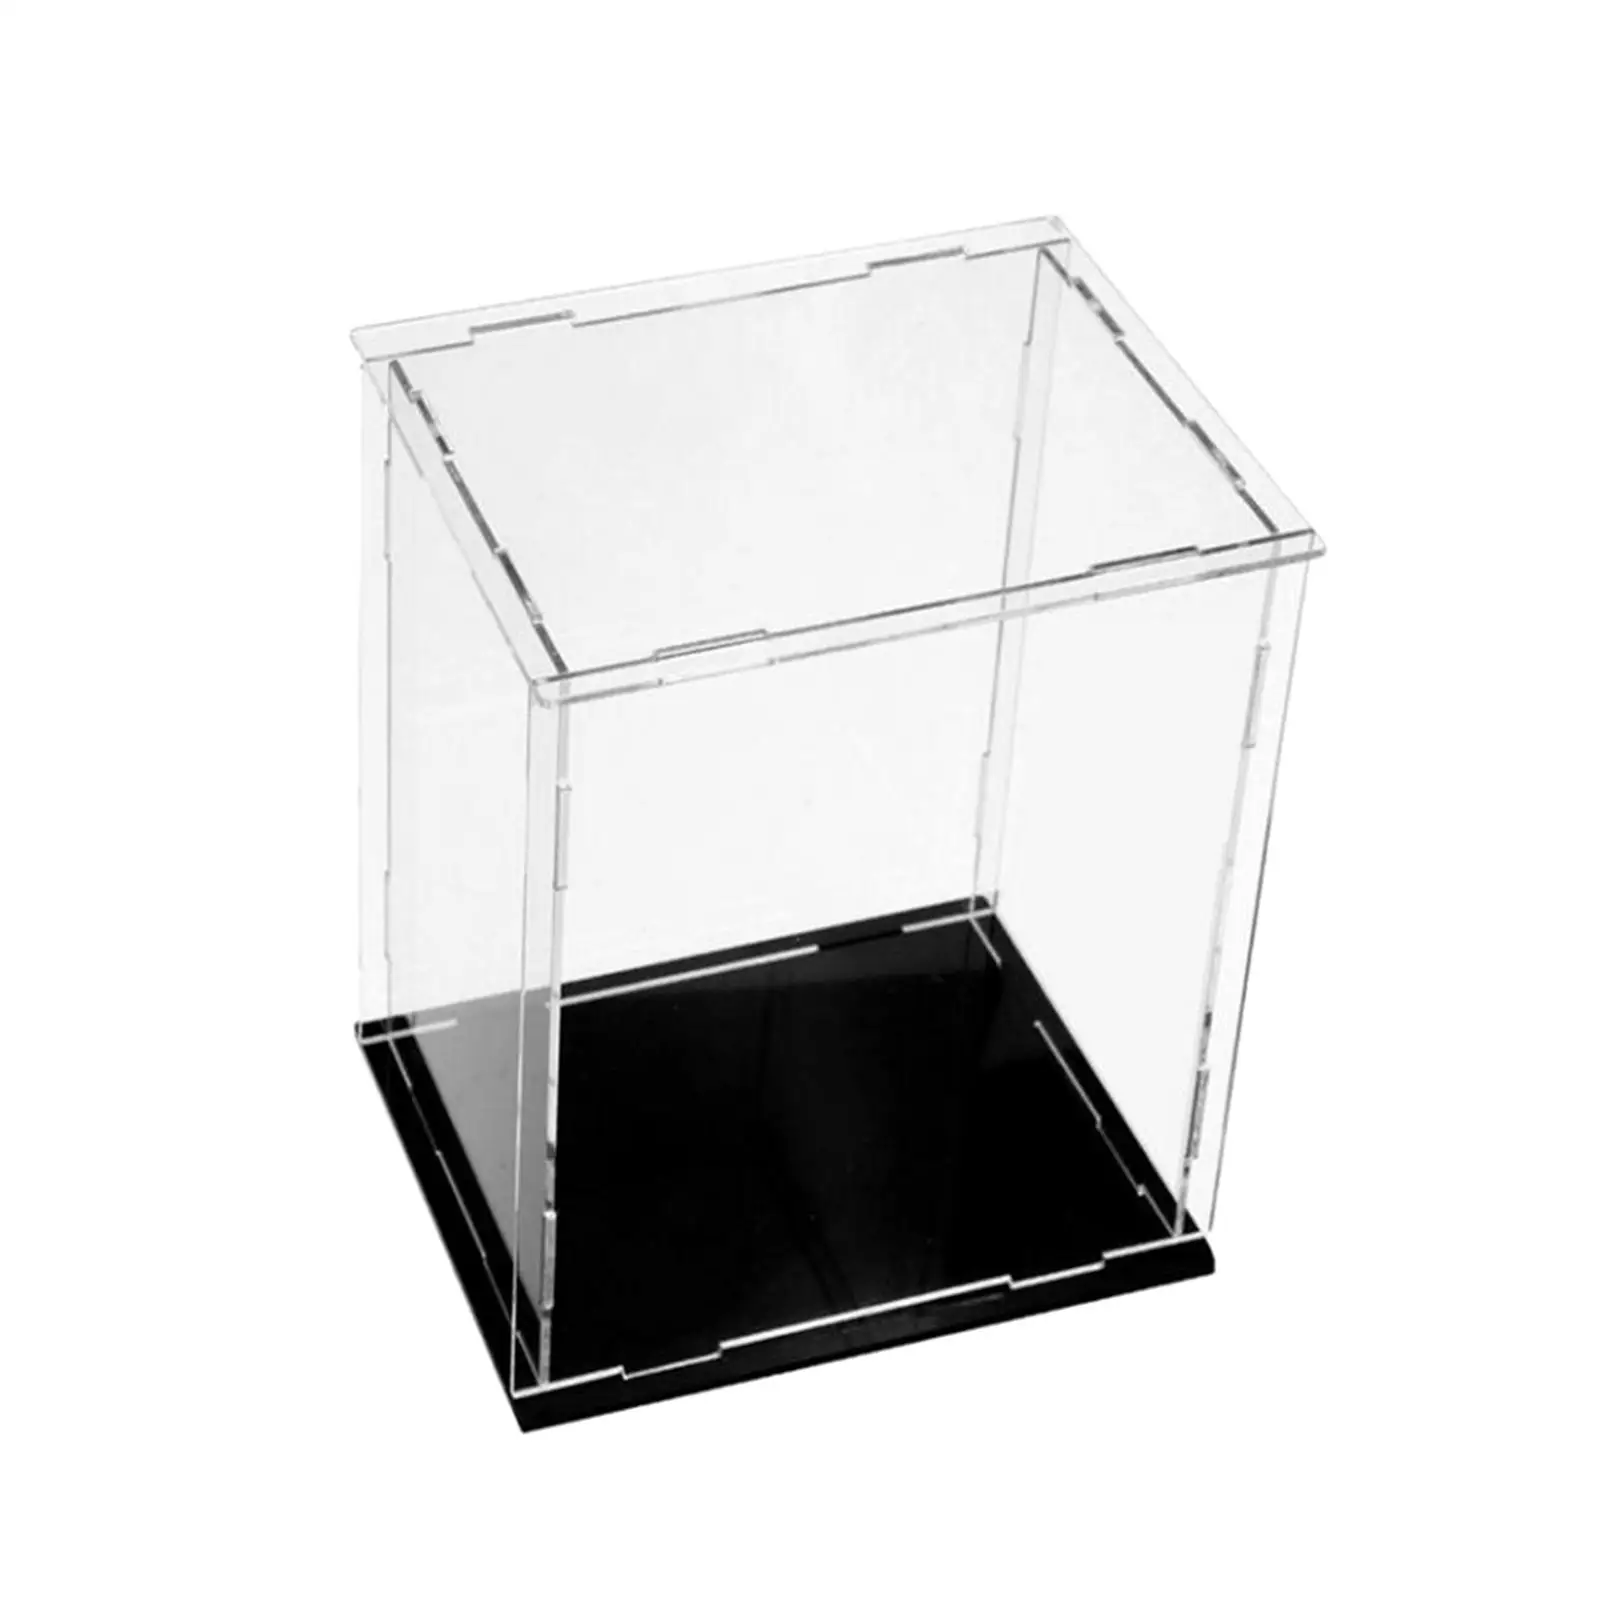 Acrylic Display Case Action Figures Display Box for Action Figure Toys Dolls